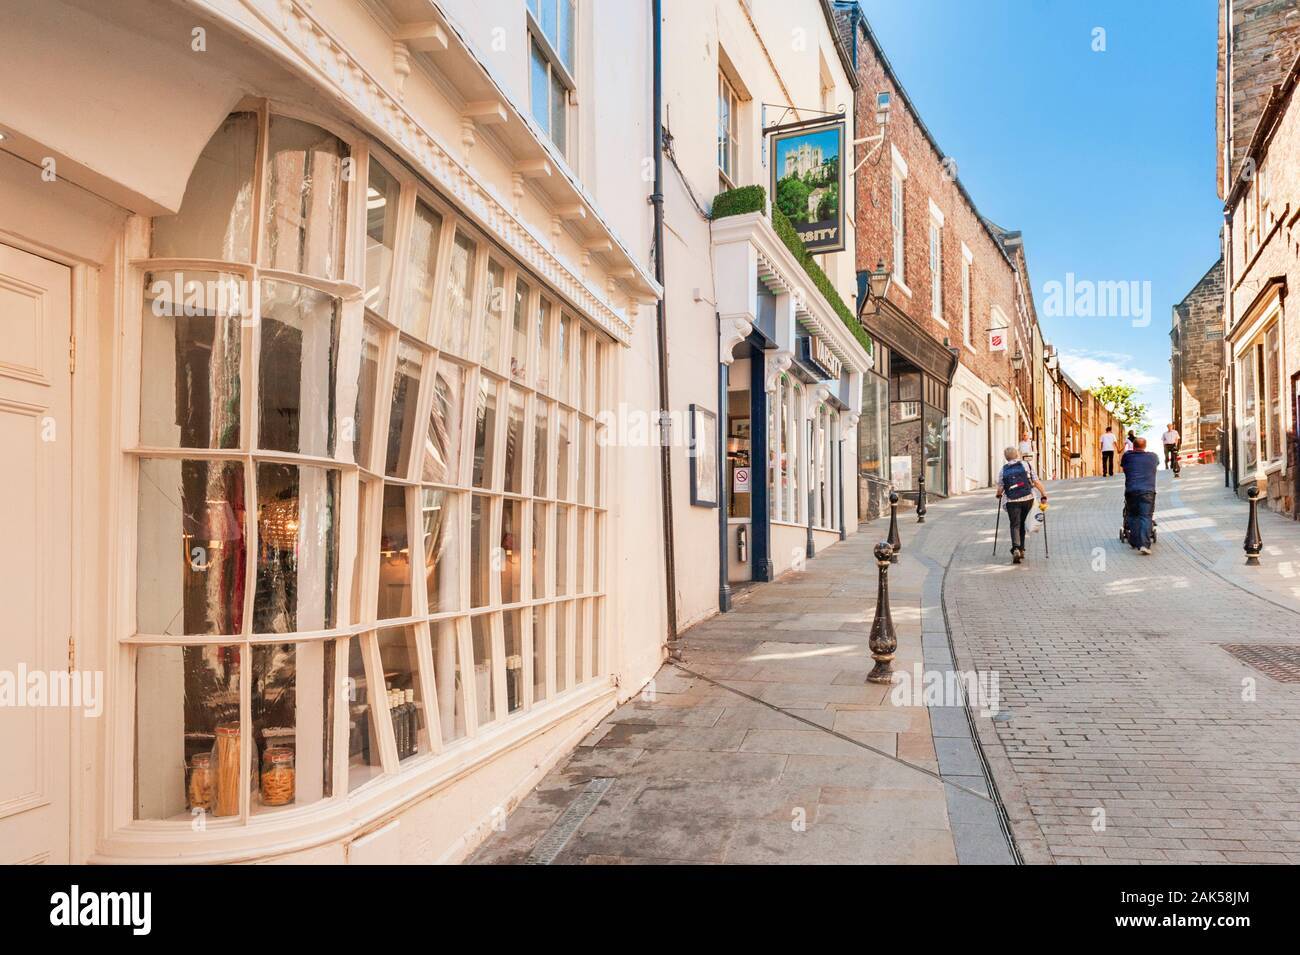 Narrow cobbled road late 18th or early 19th century Grade II listed buildings and old shop frontage Saddler Street Durham Stock Photo